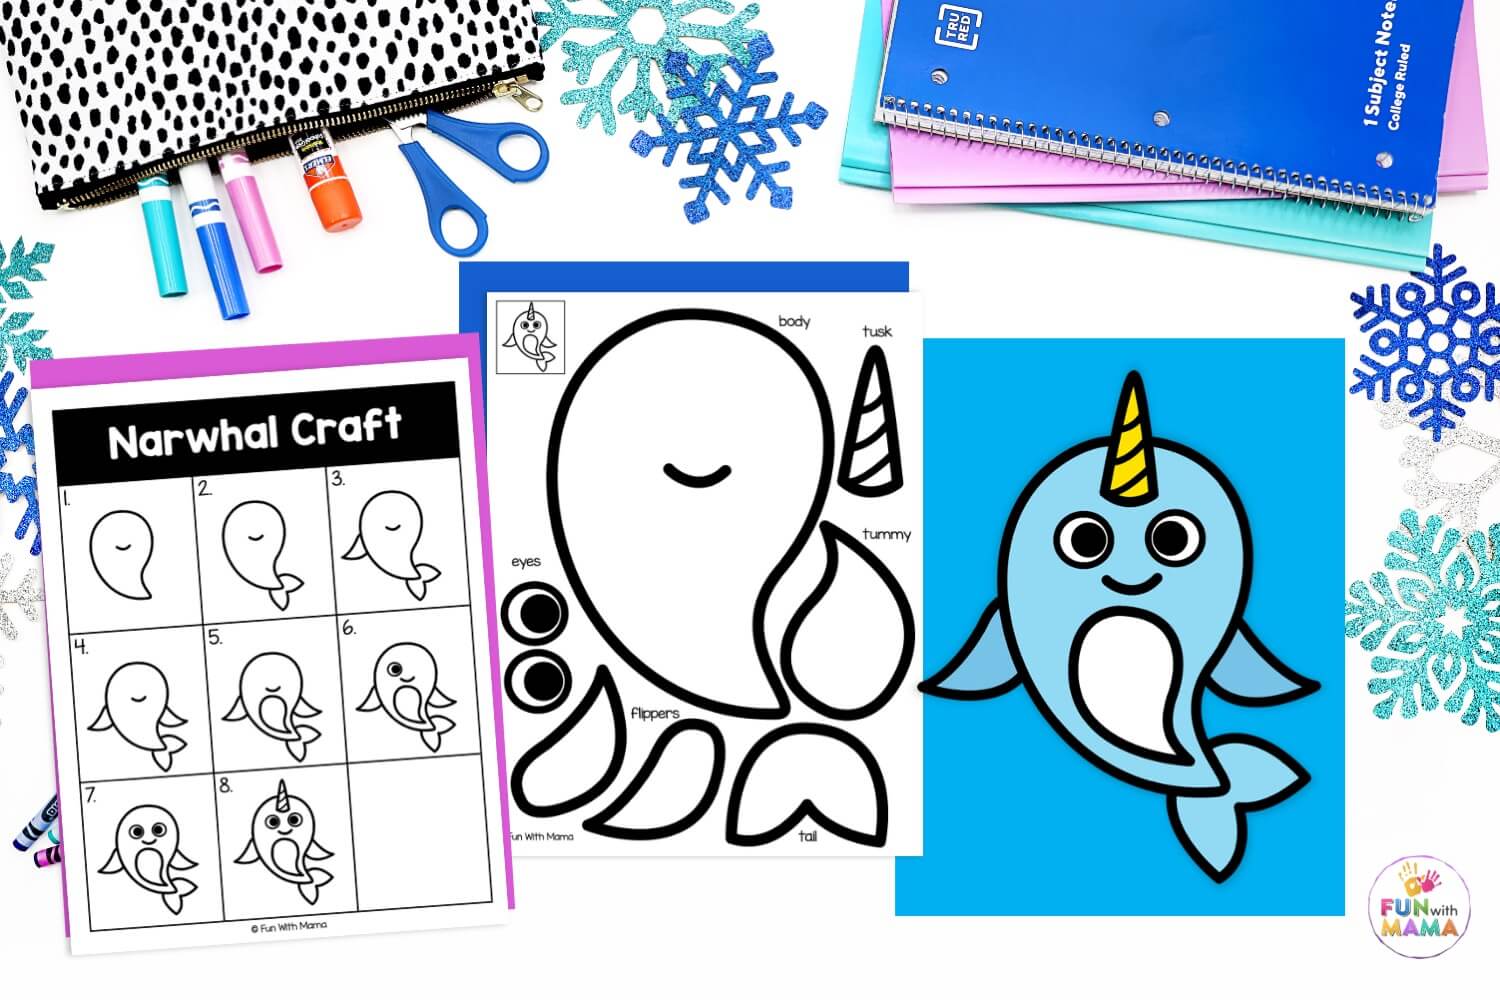 Narwhal craft free template for kids